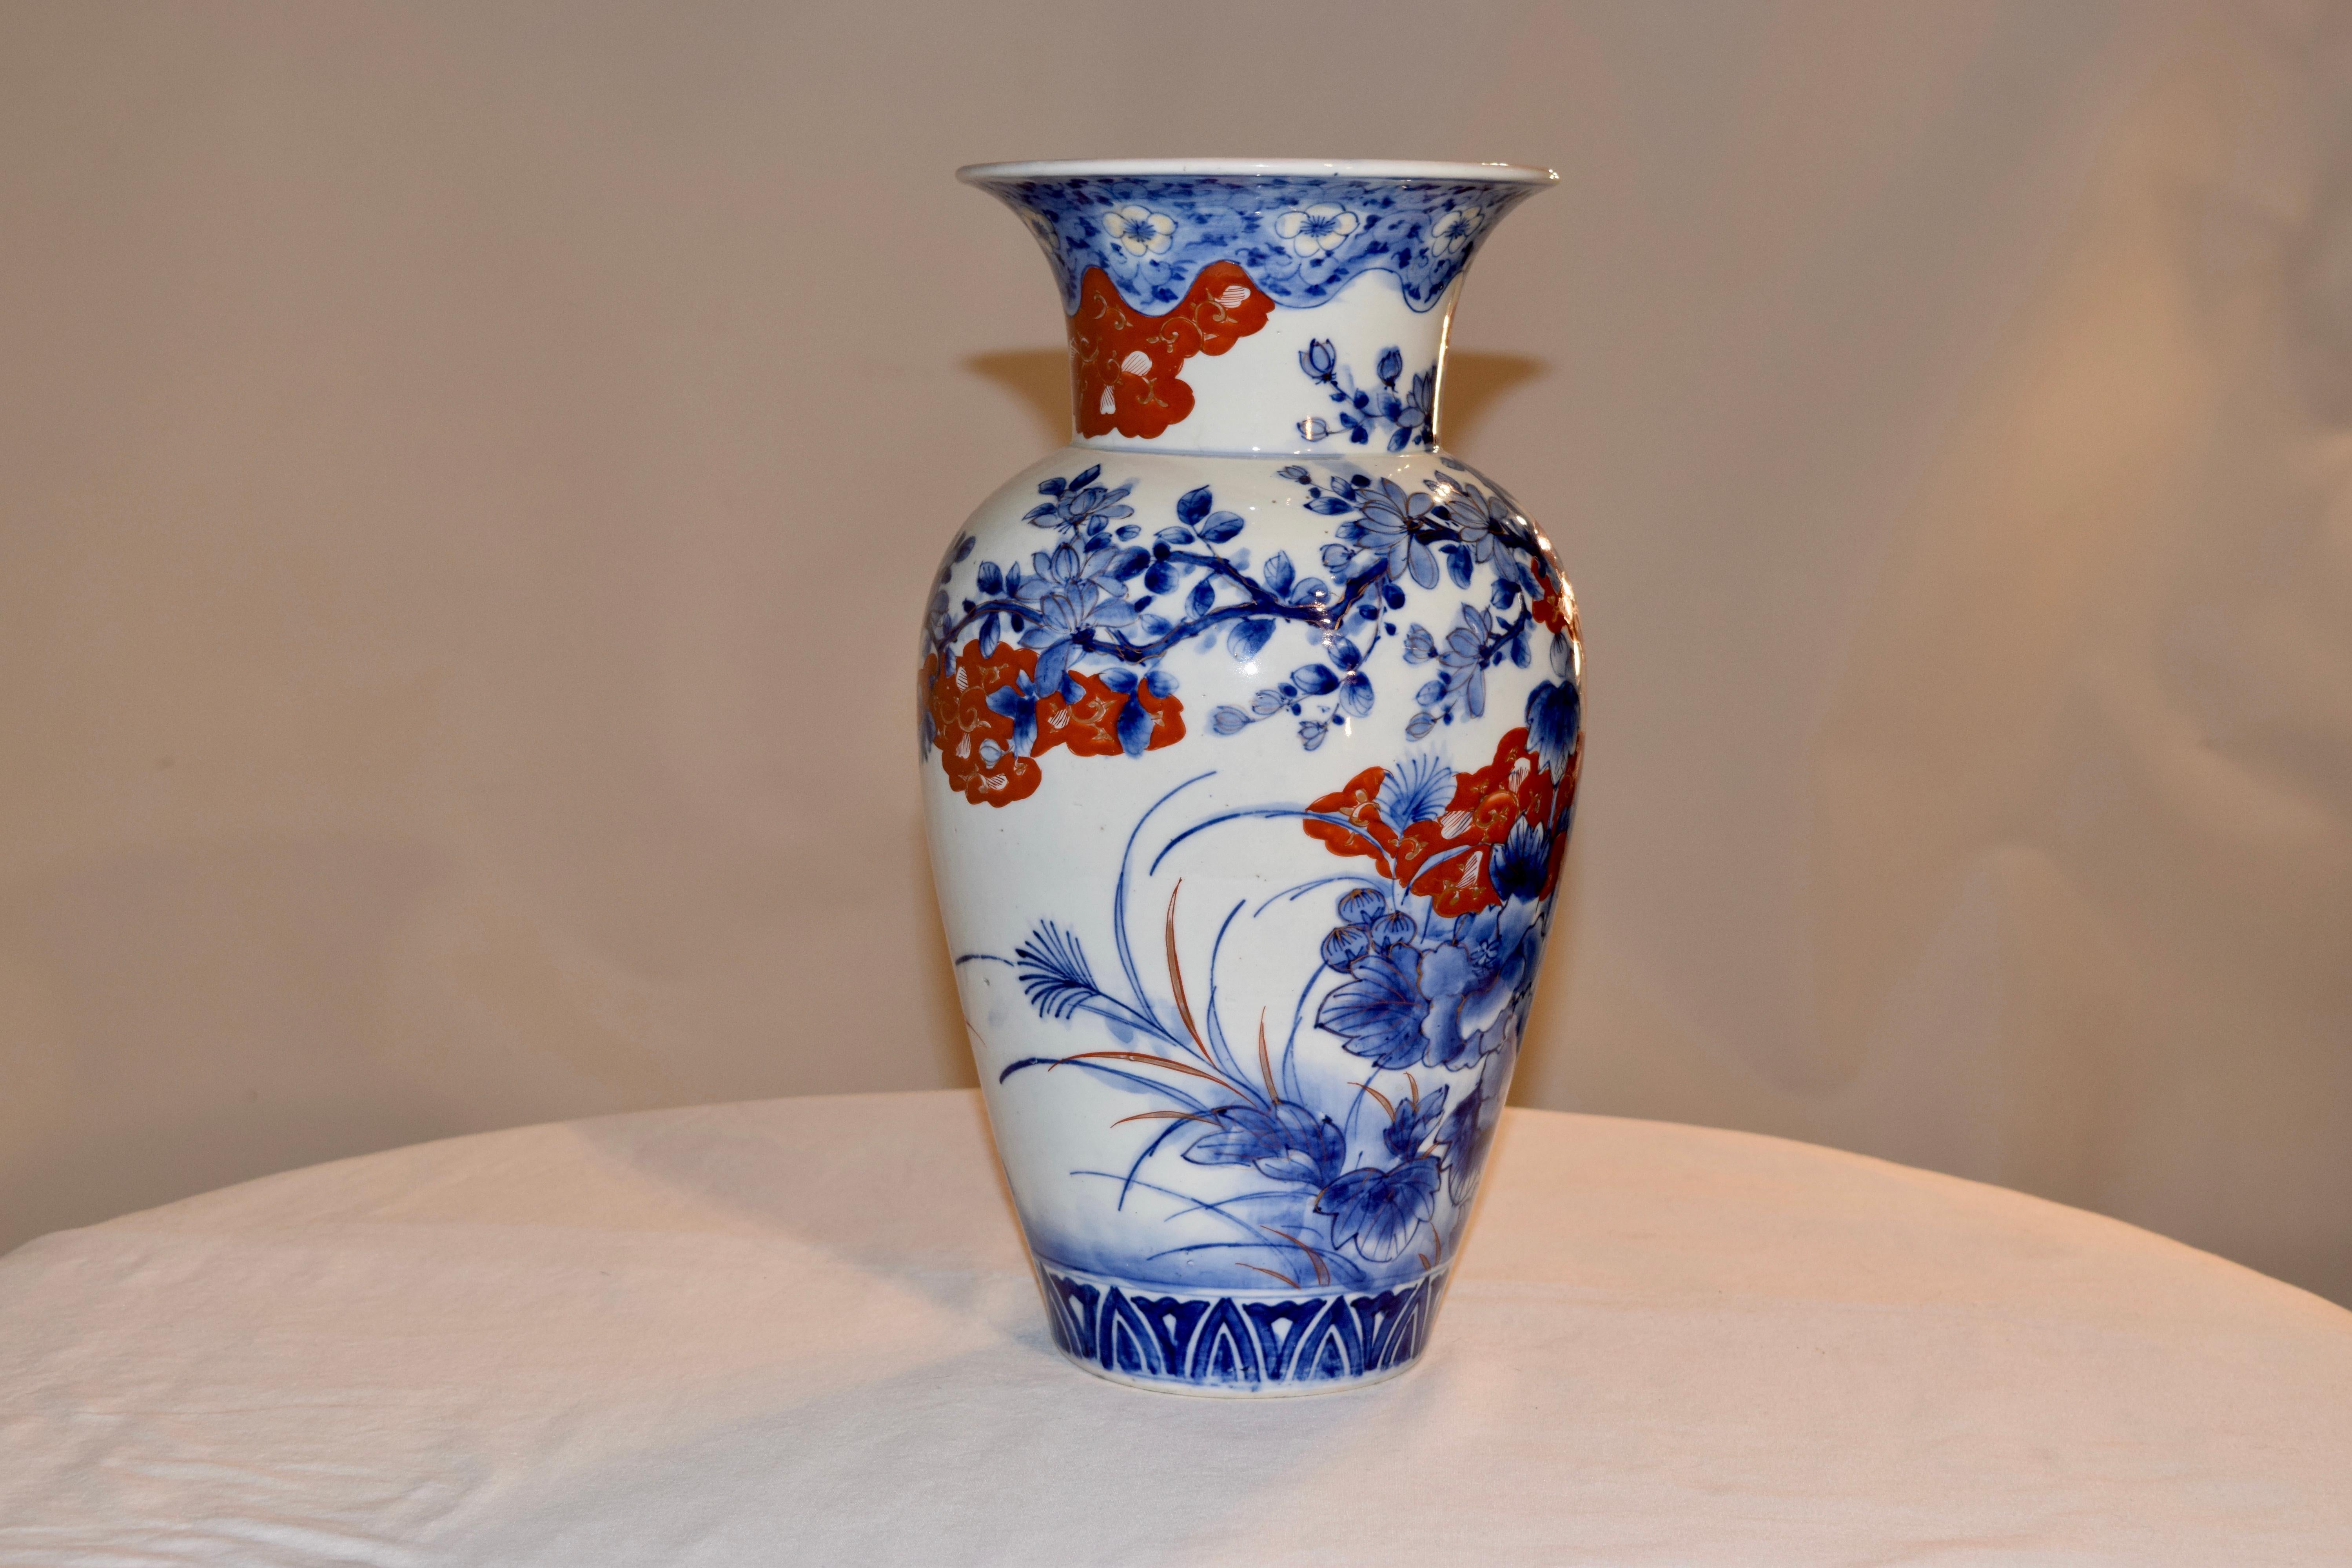 19th century Chinese export vase from England with a lovely shape and extraordinary pattern hand painted in rich hues of blue and red.